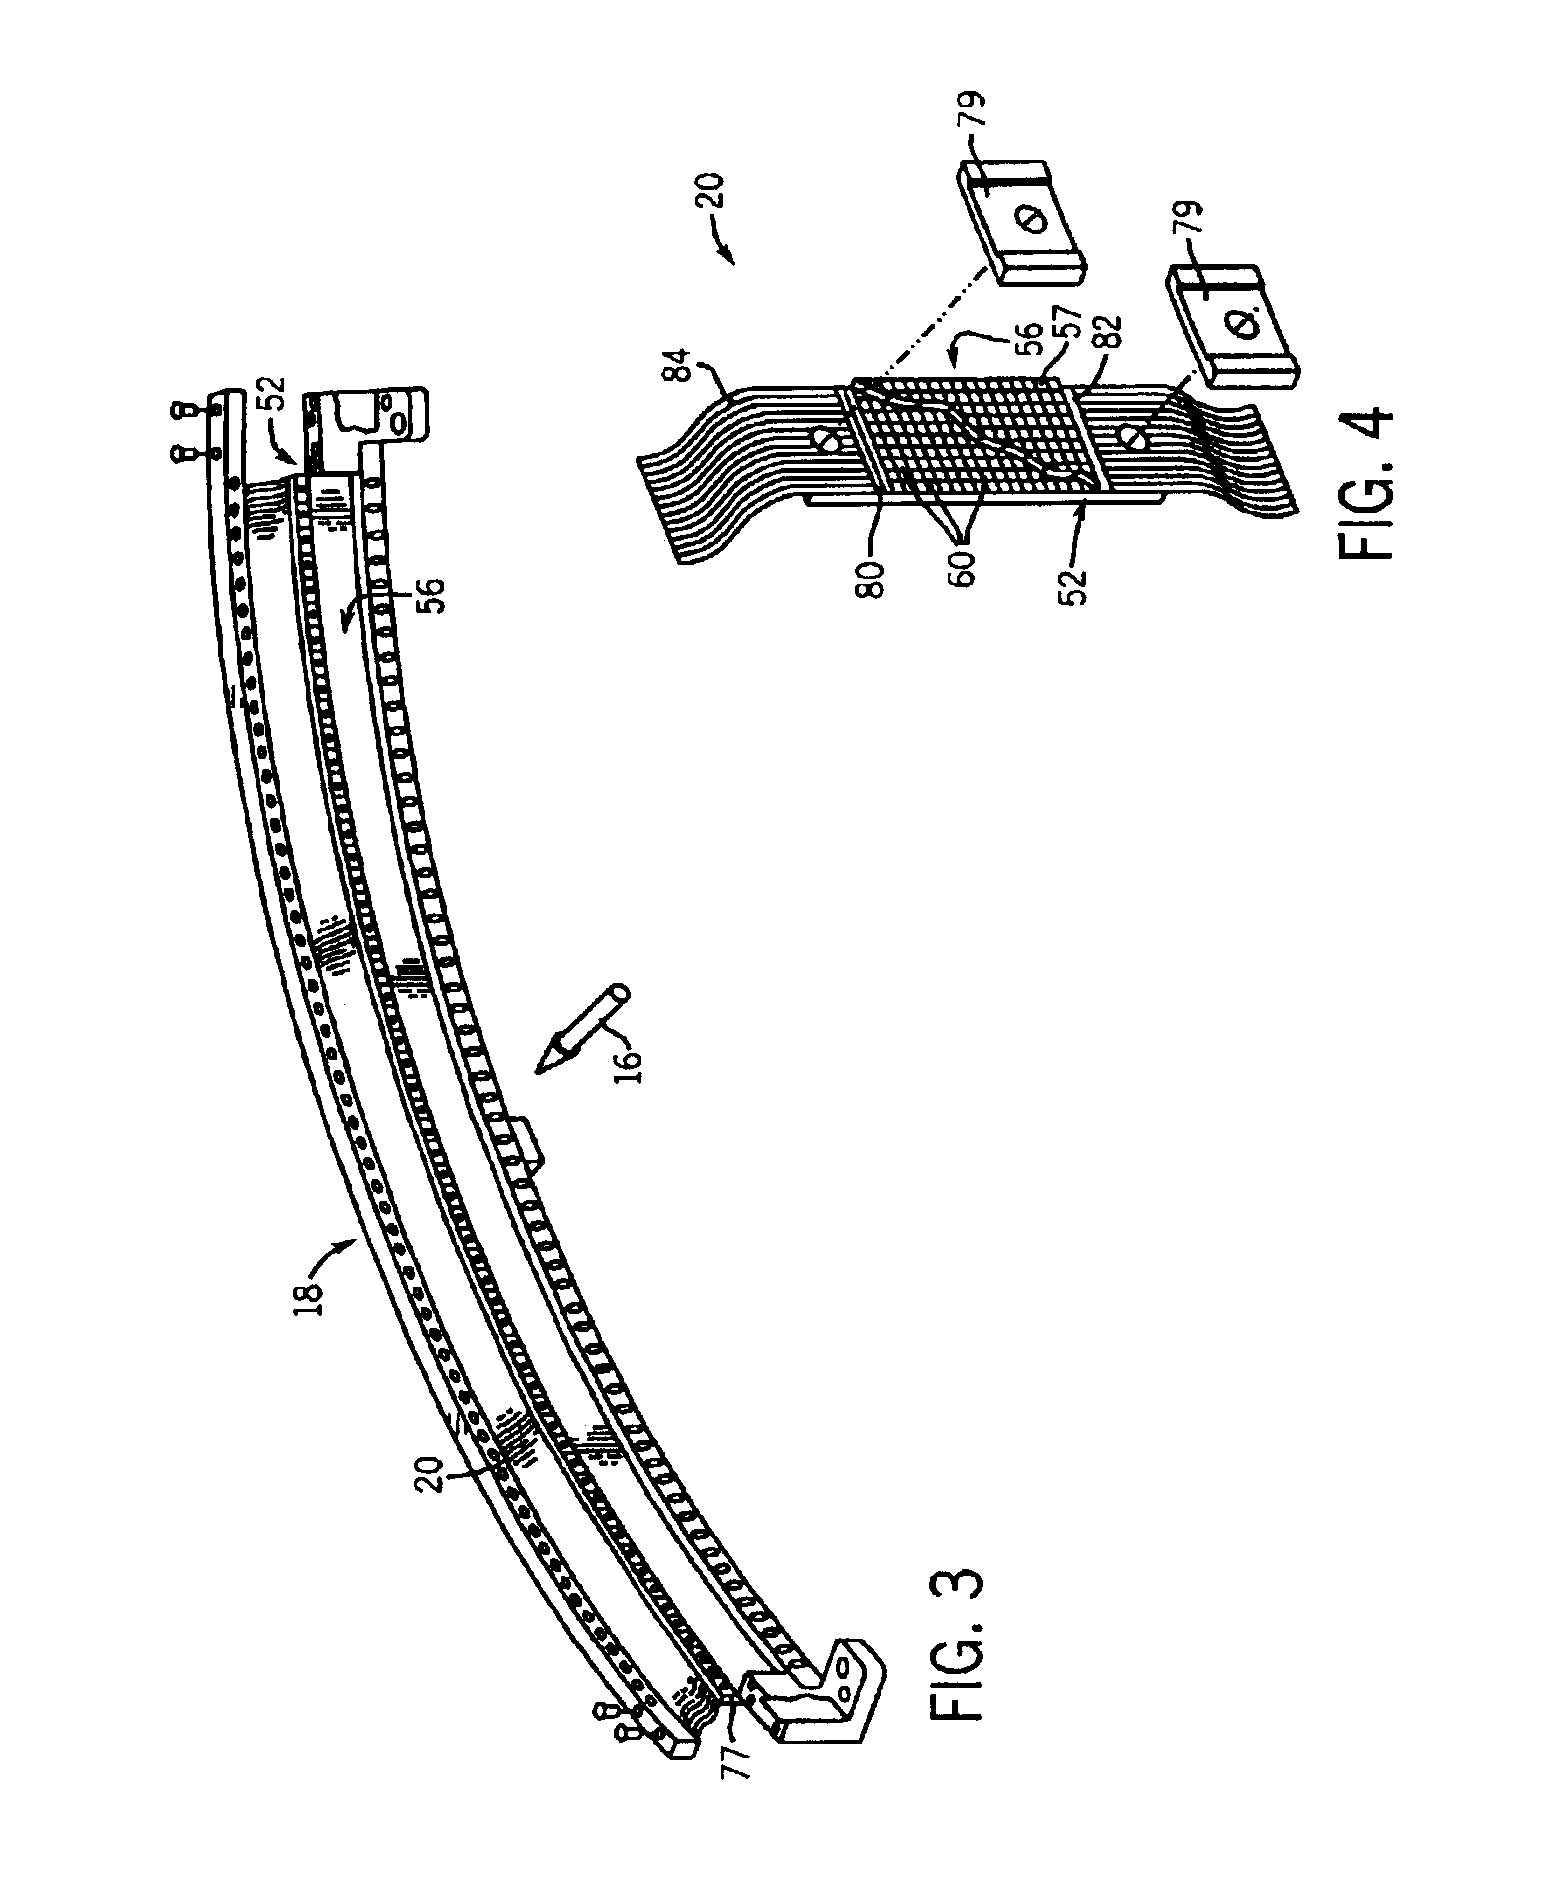 Collimator assembly having multi-piece components